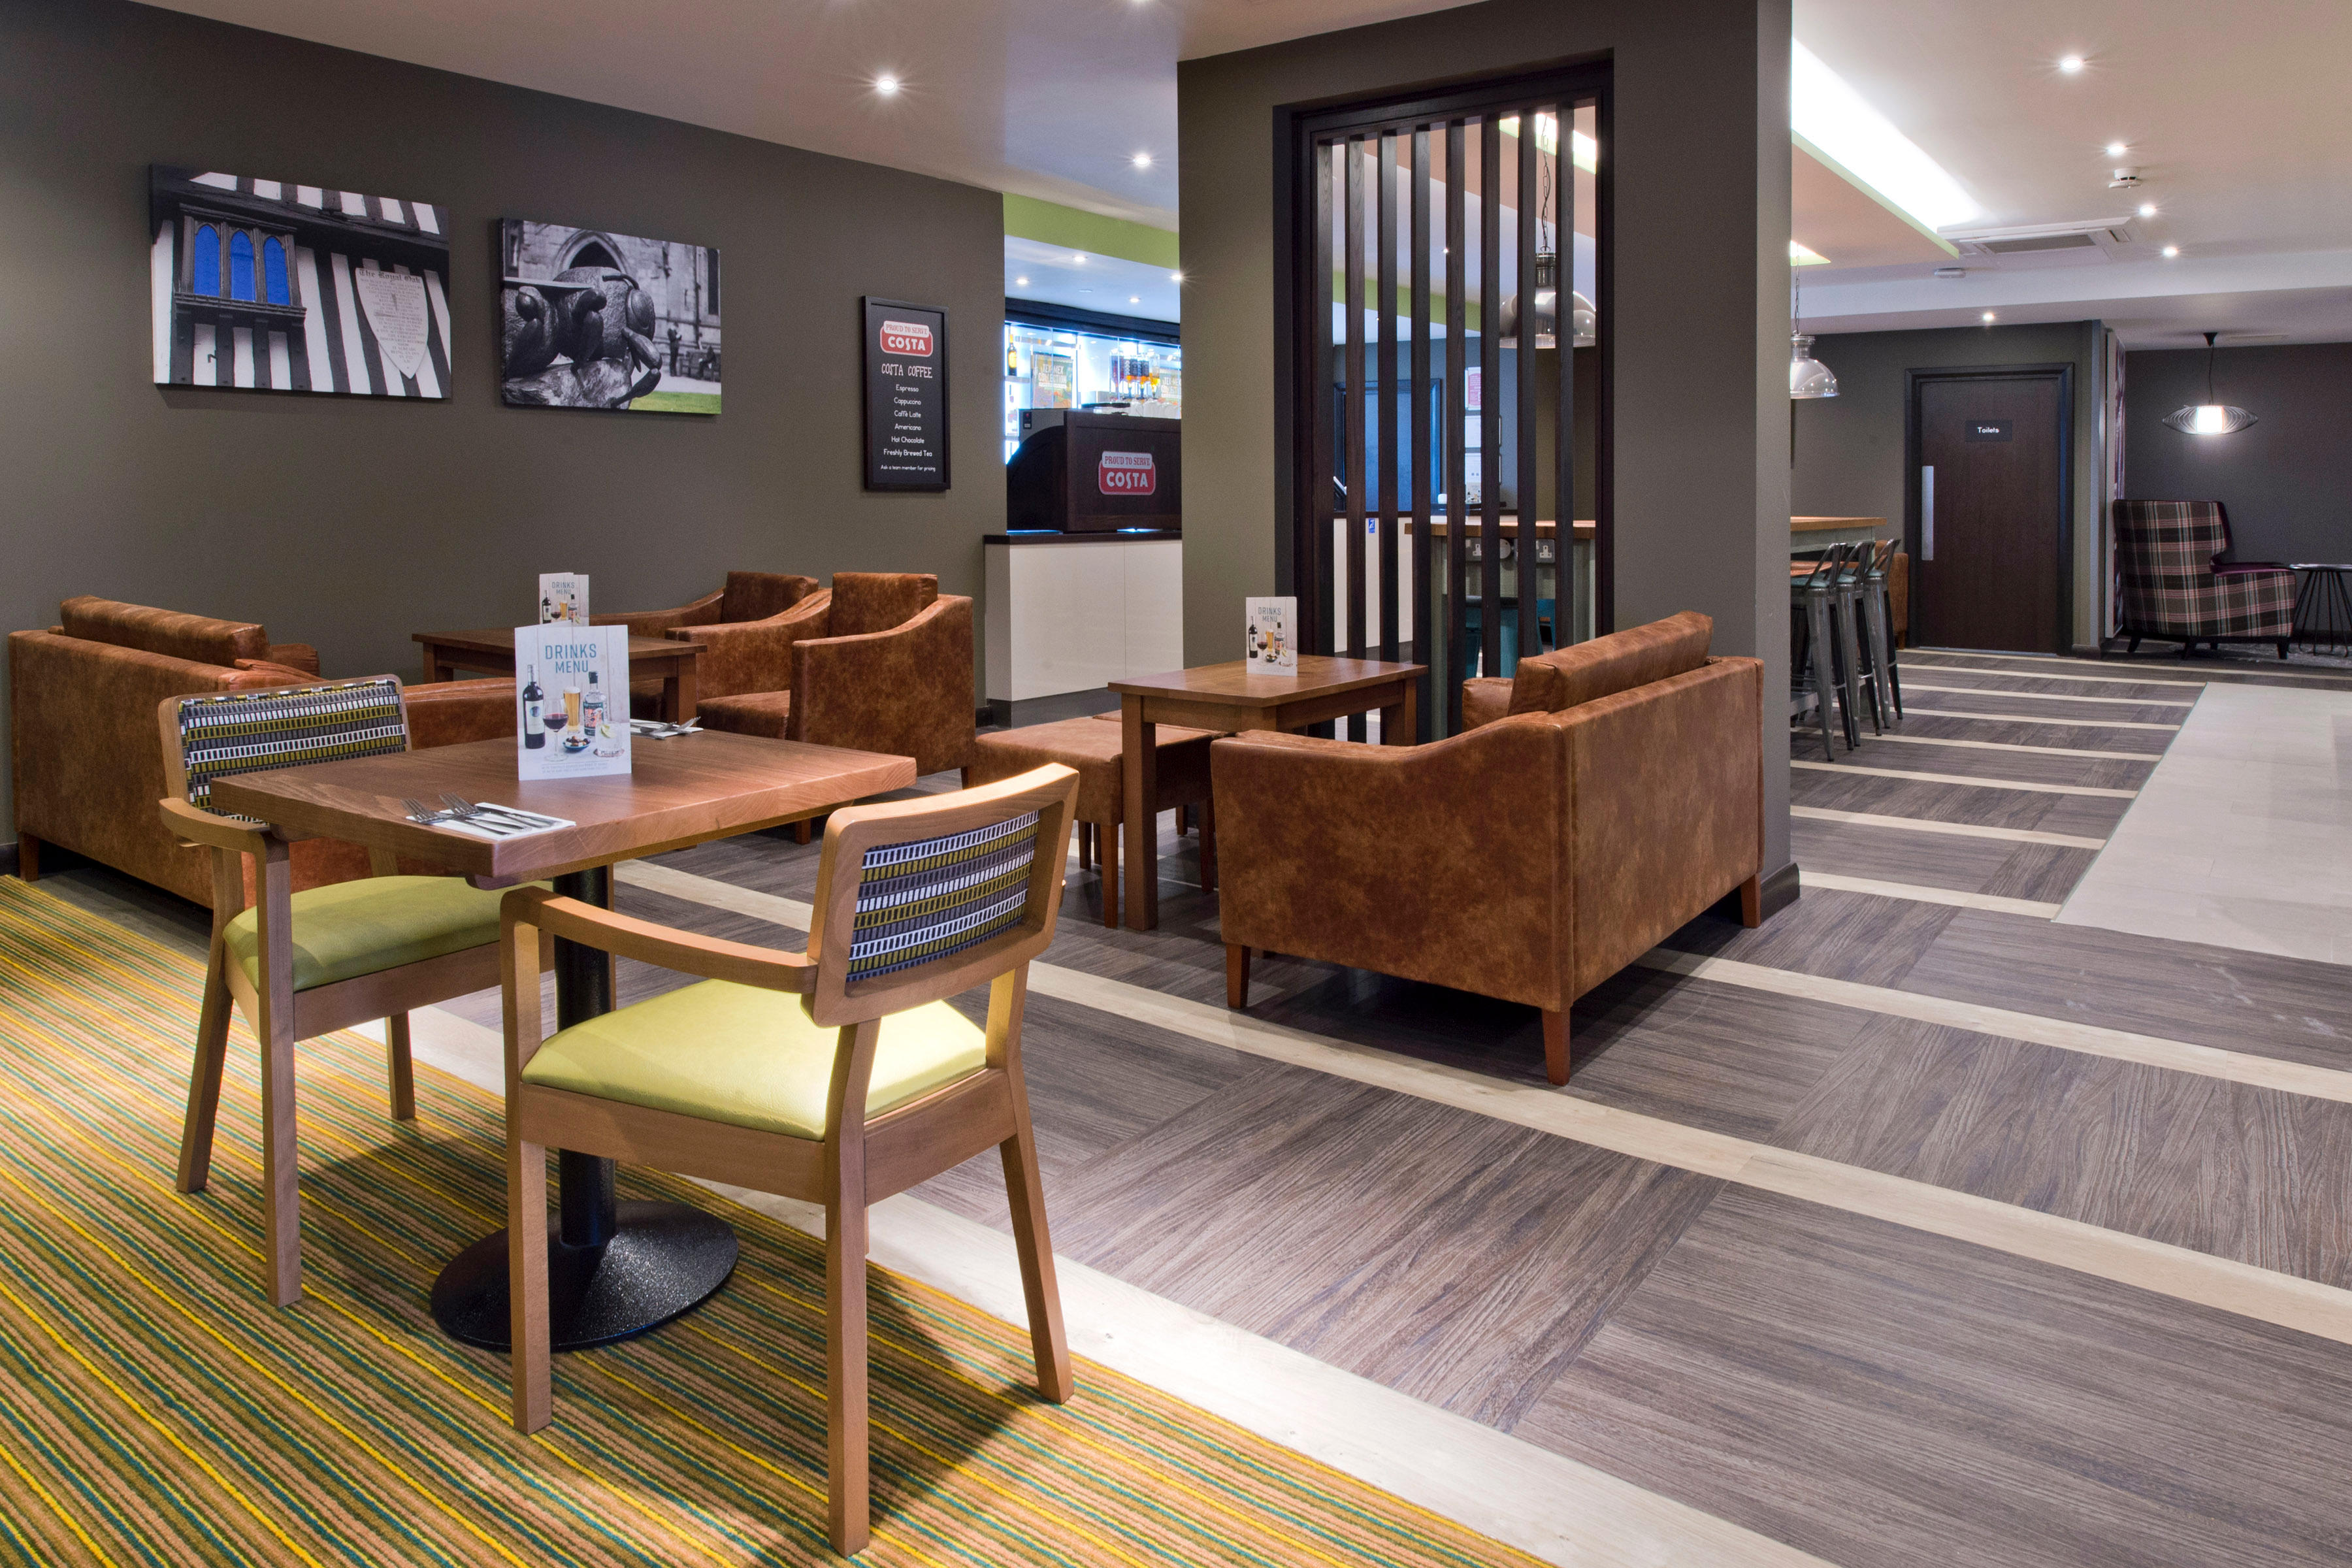 Images Premier Inn Chesterfield Town Centre hotel